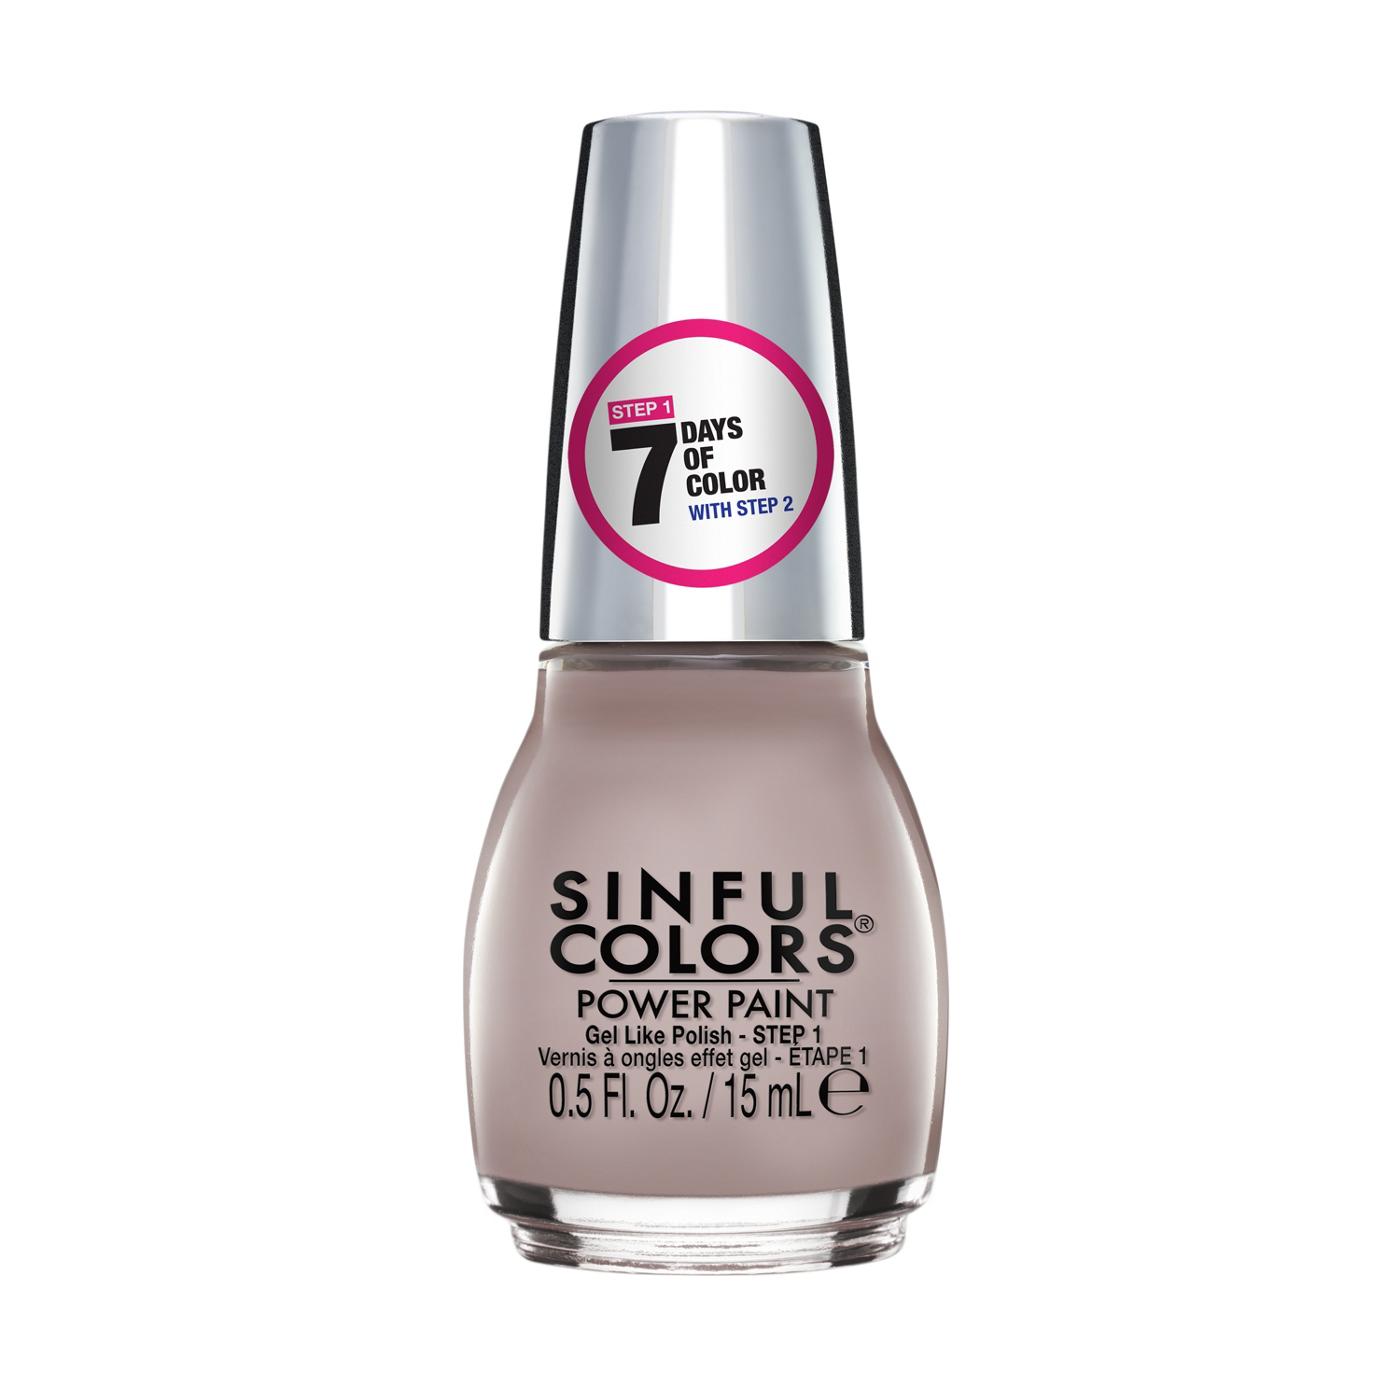 Sinful Colors Power Paint Nail Polish - Never Not Working; image 1 of 6